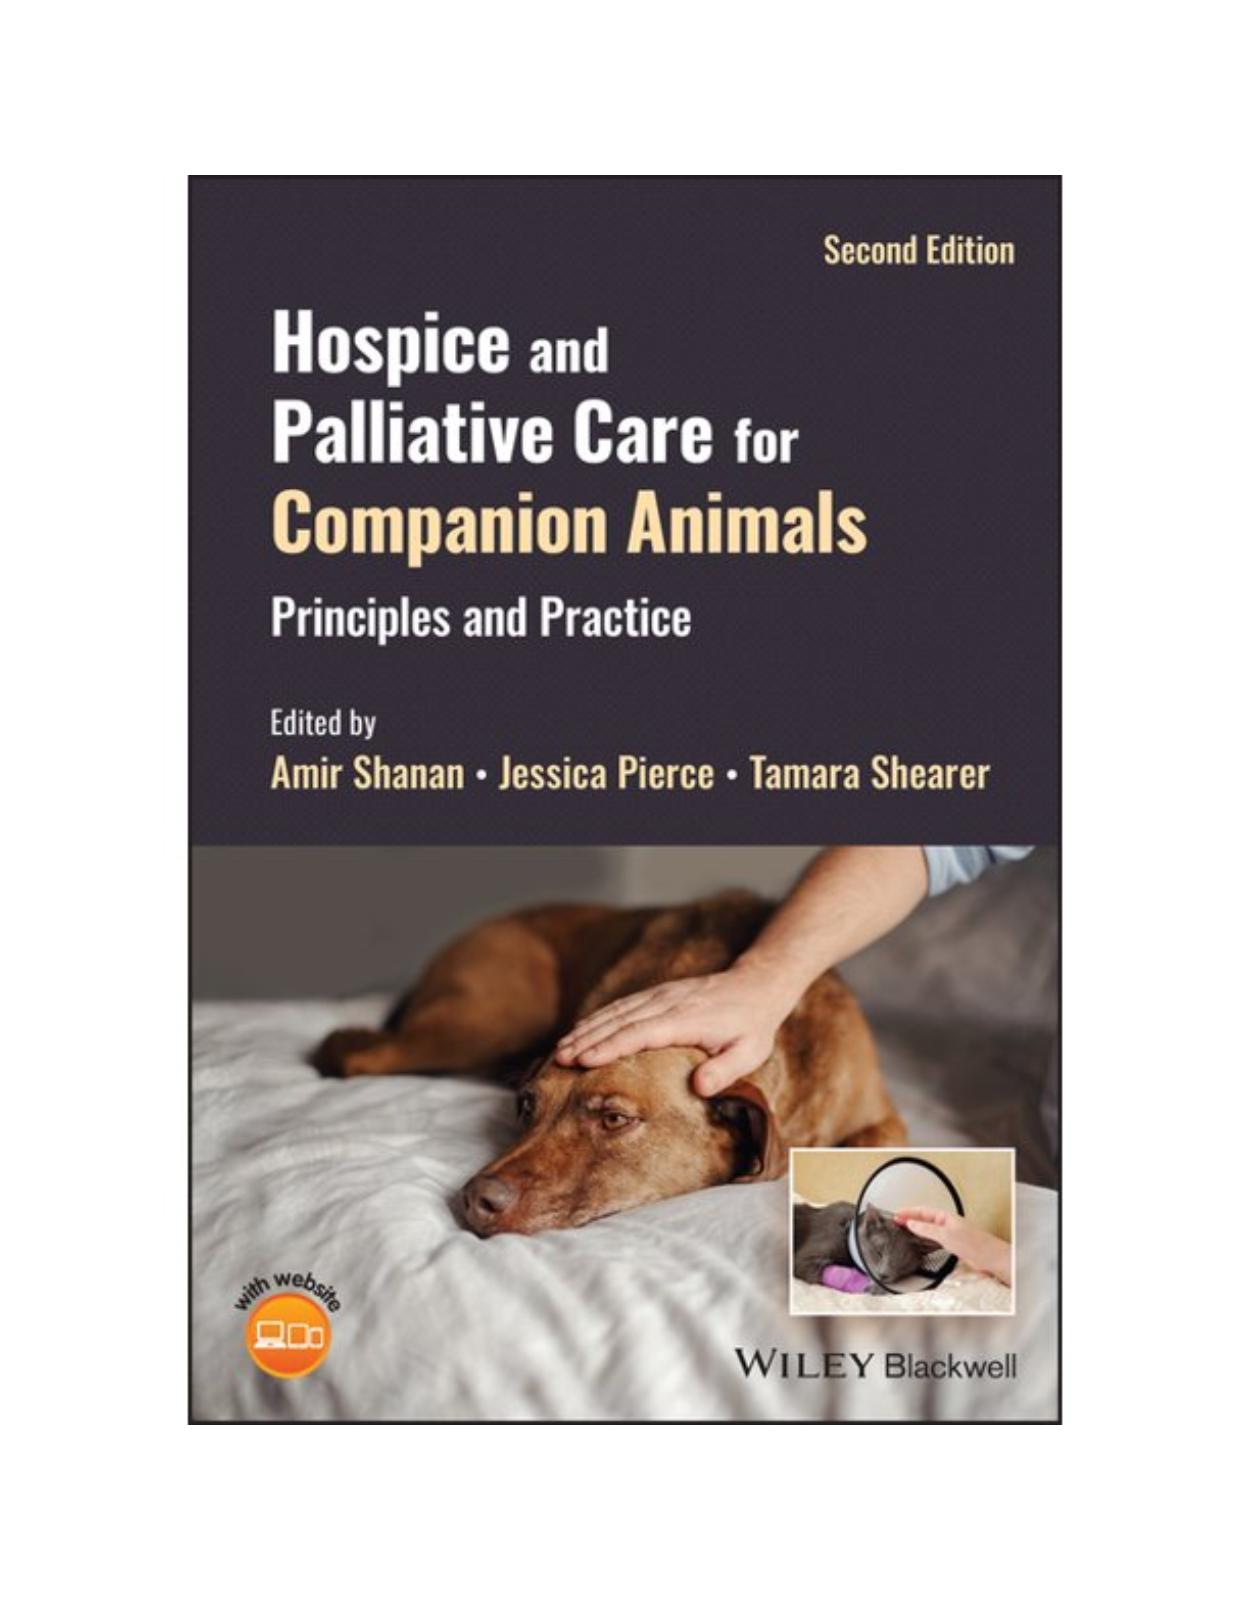 Hospice and Palliative Care for Companion Animals – Principles and Practice